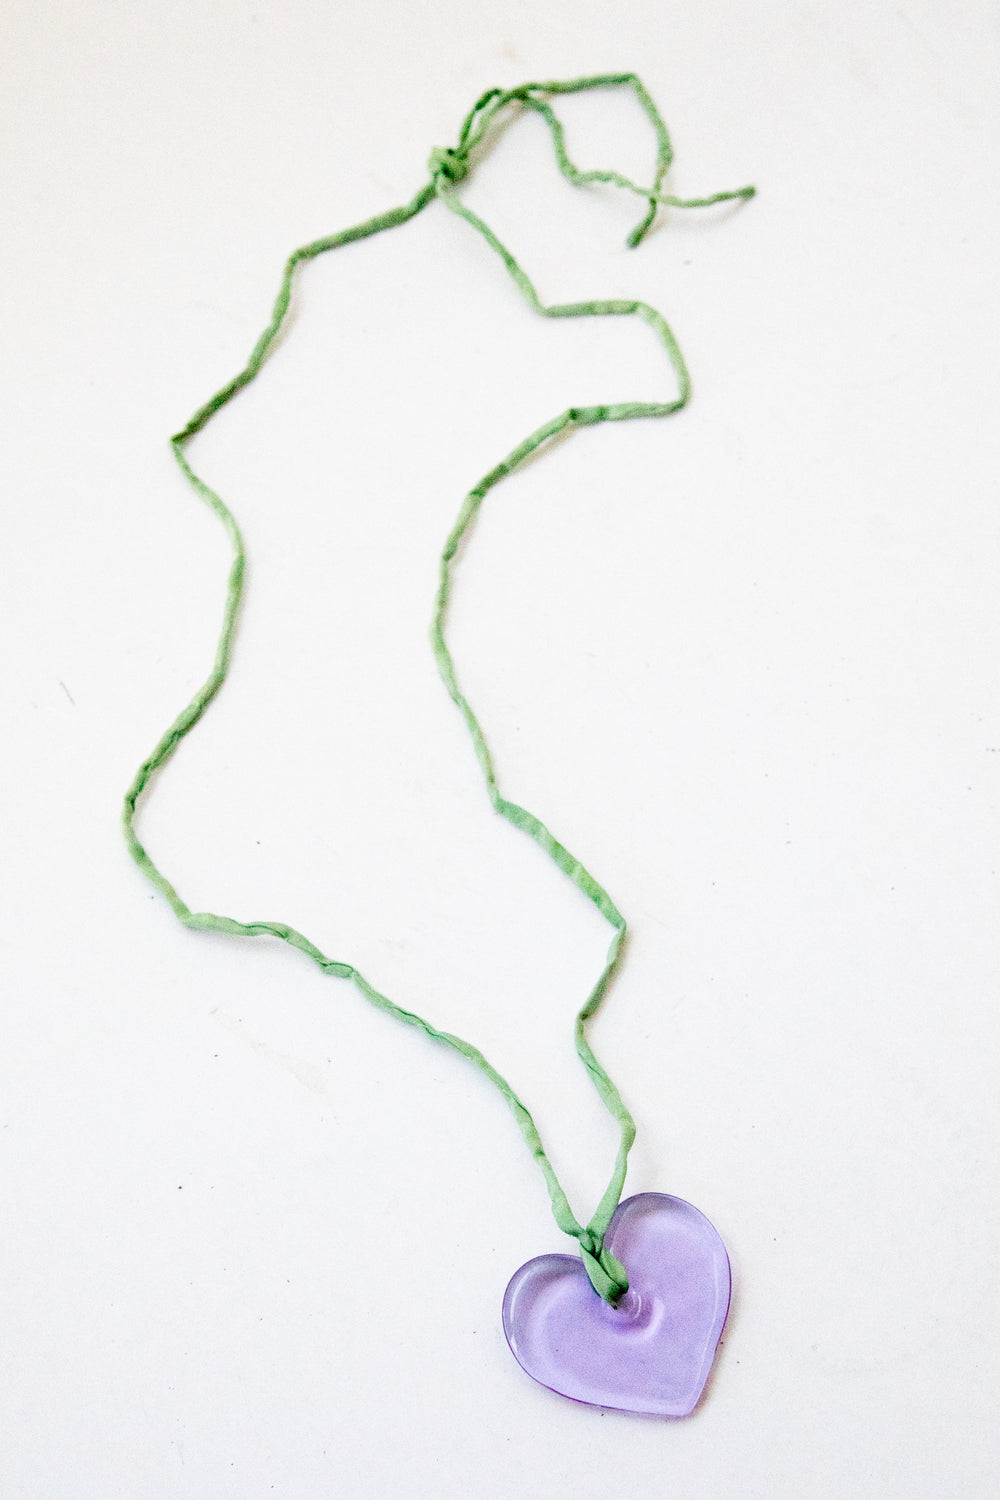 Lavender + Green Heart Necklace